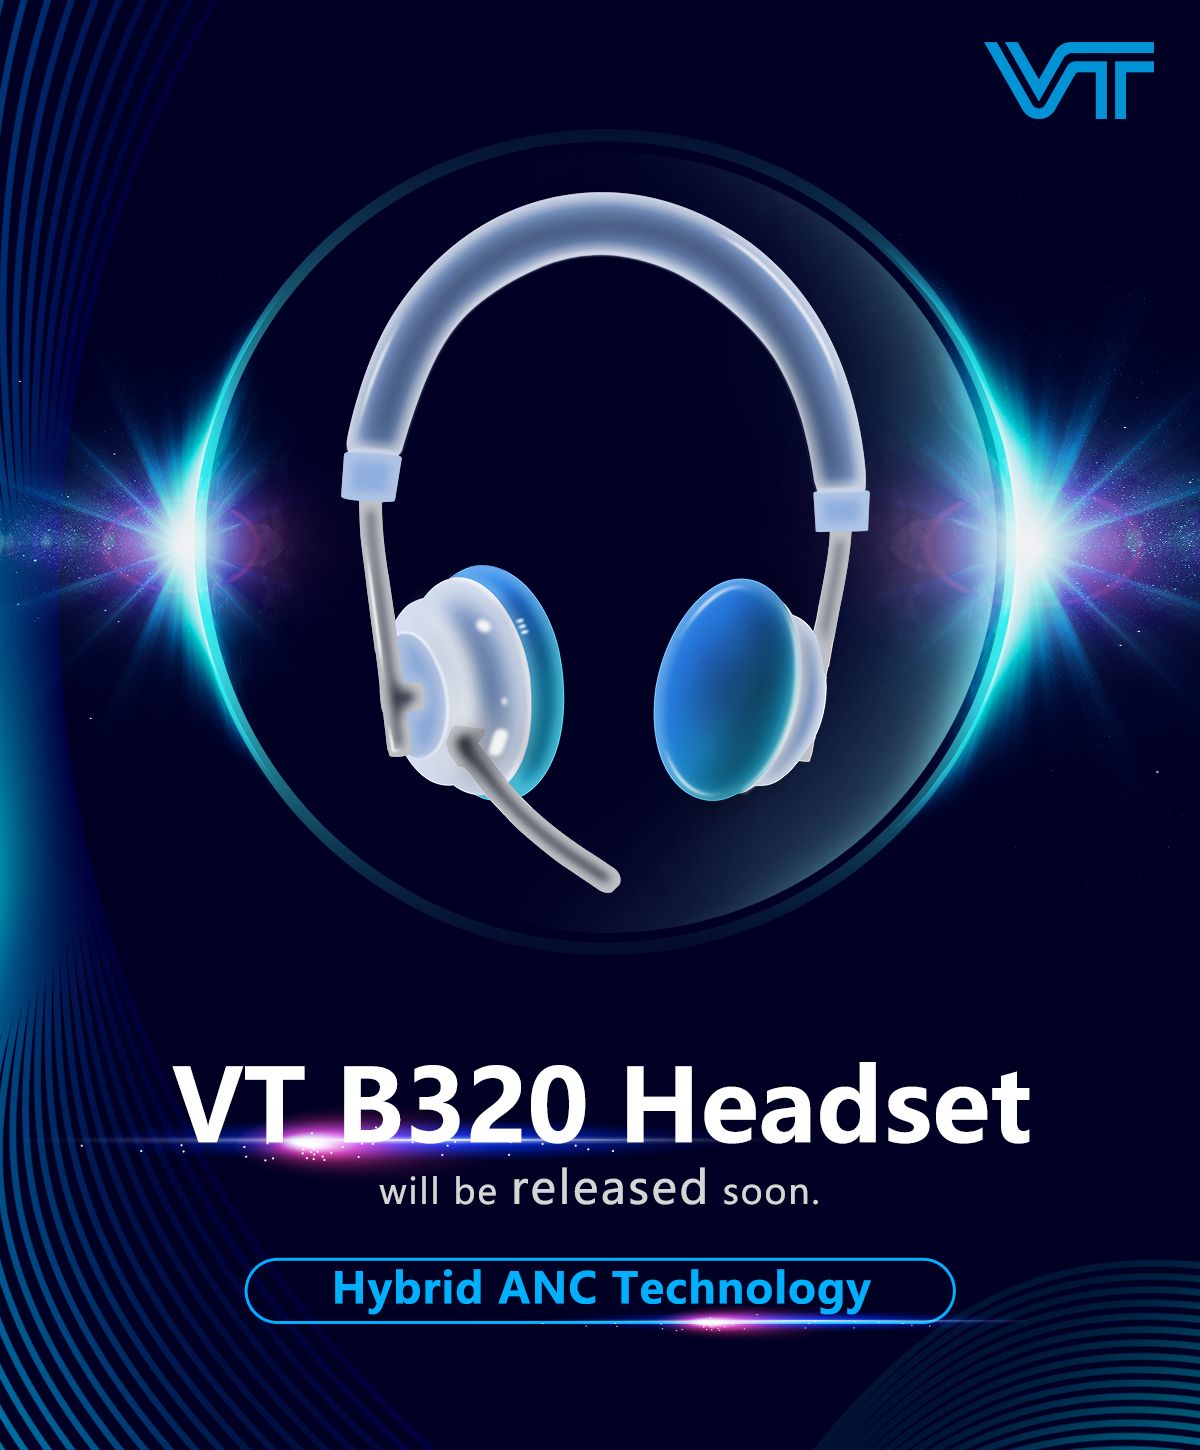 VT has recently launched the newest ANC Bluetooth Headset - VTB320